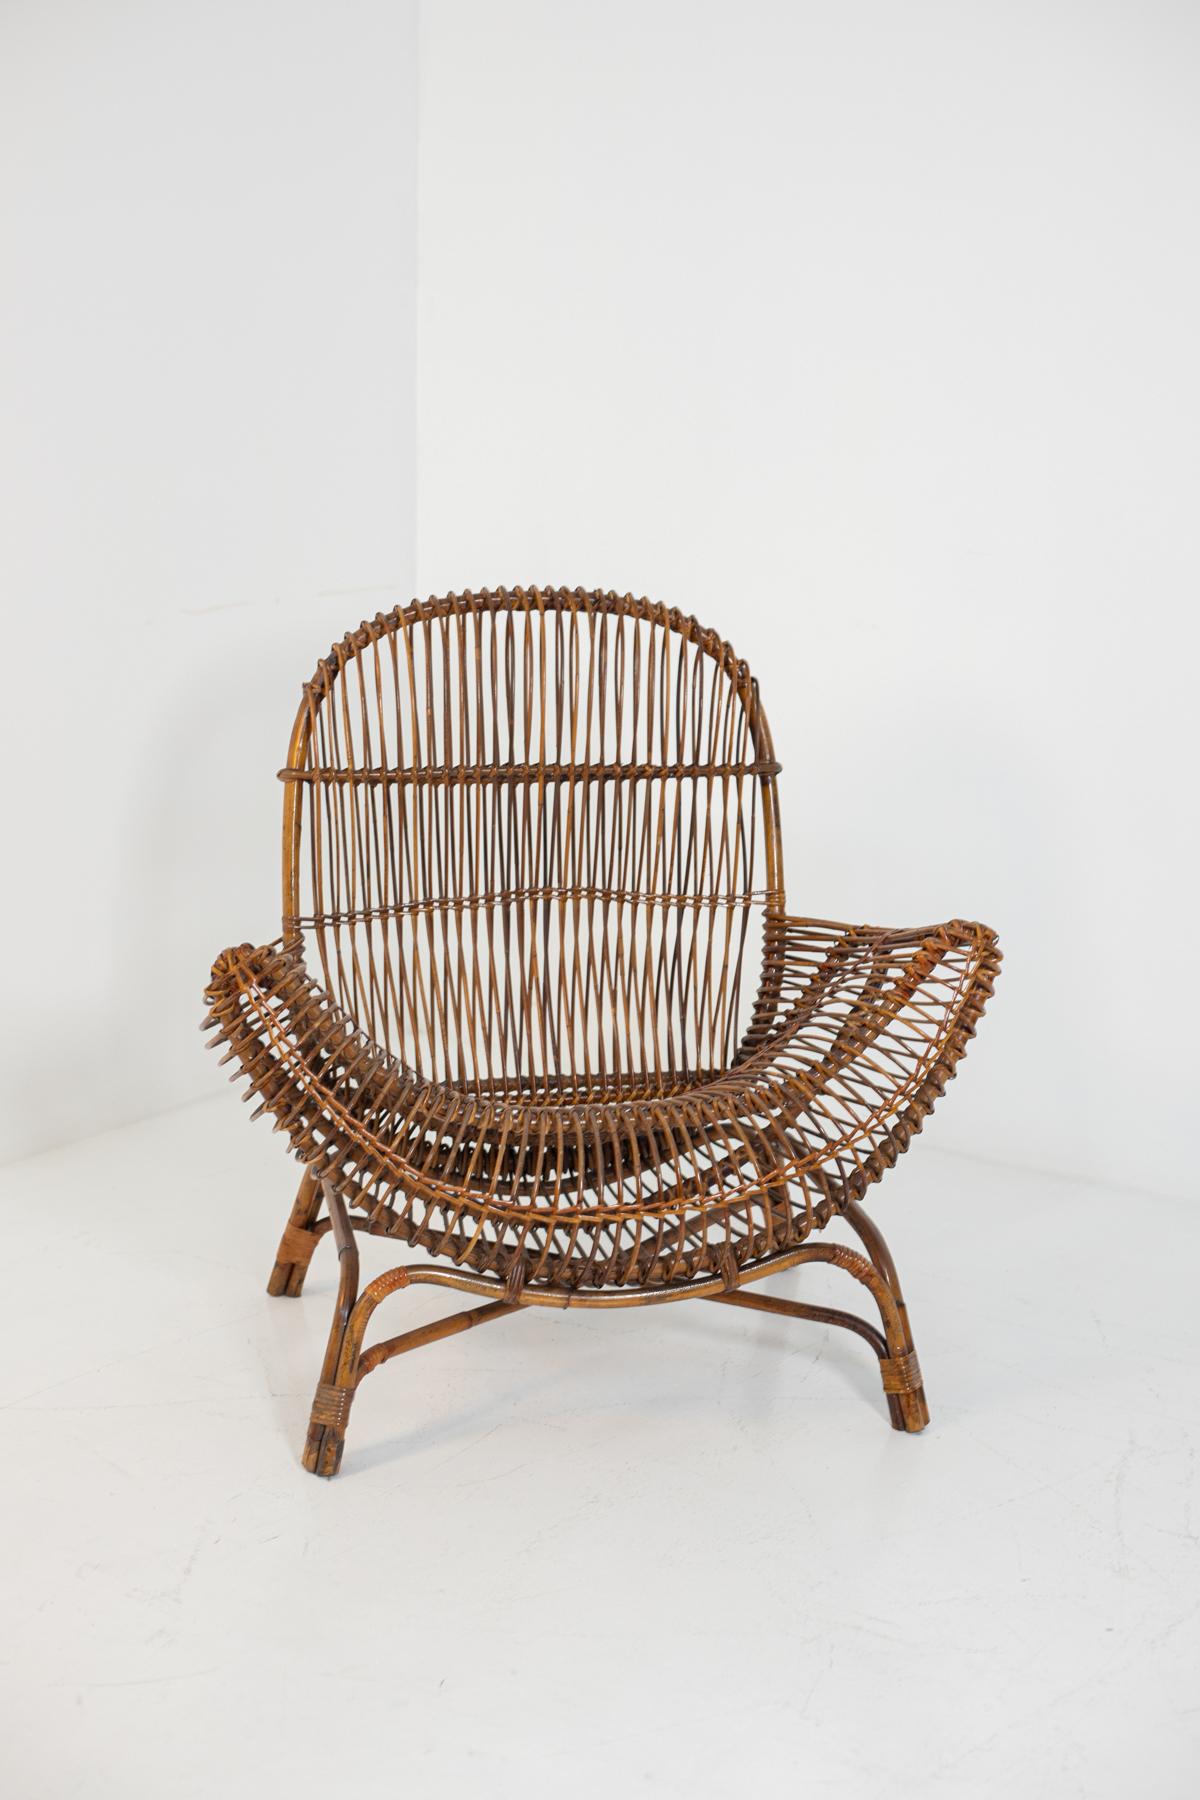 Italian bamboo armchair attributed to Franco Albini from 1950. The armchair has become a real trend in the last couple of years. The armchair's rounded, soft shape conveys softness and solidity. The feet are also made of bamboo canes anchored to the